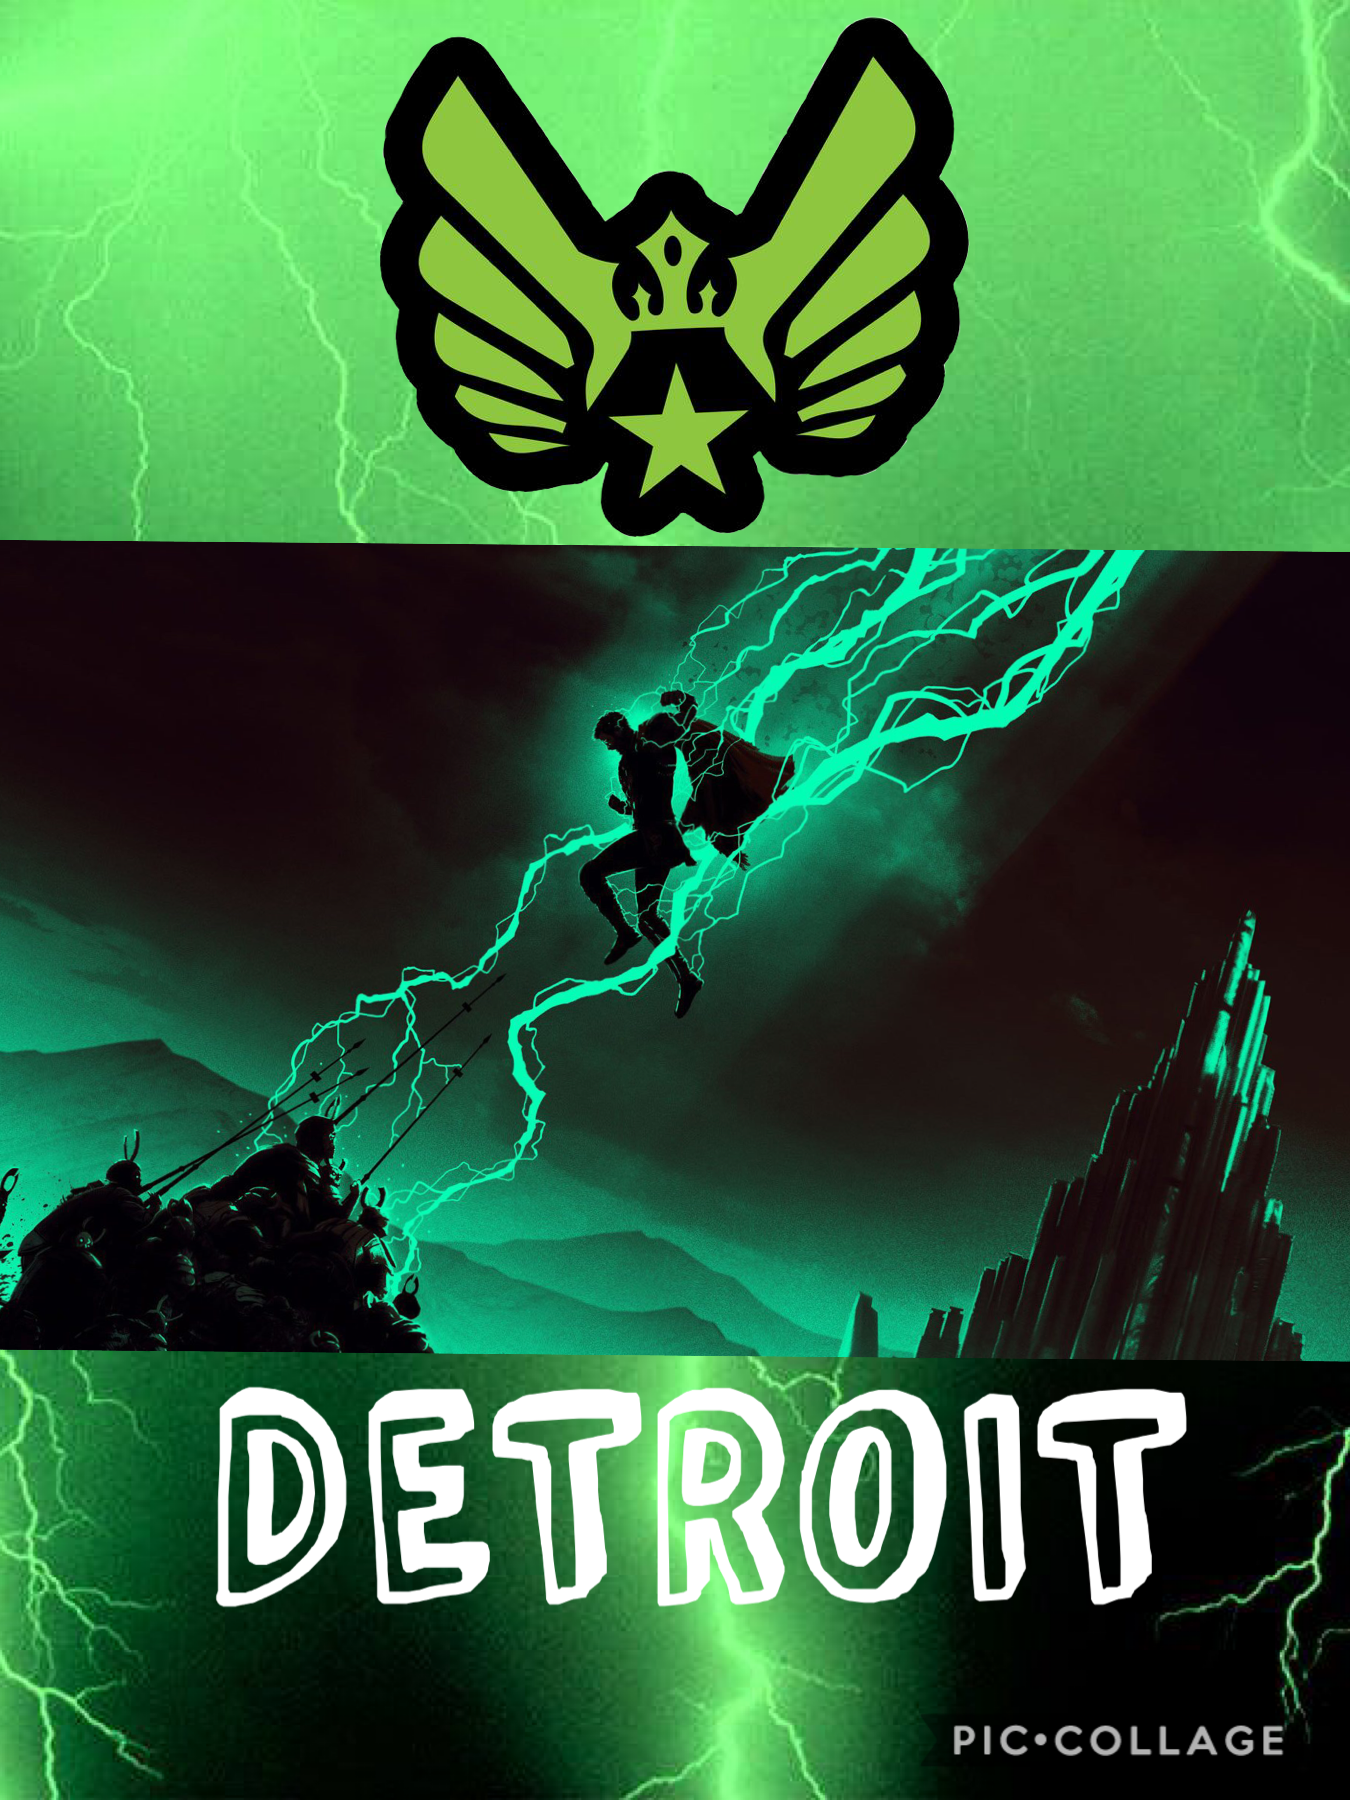 DETROIT is a person I created...